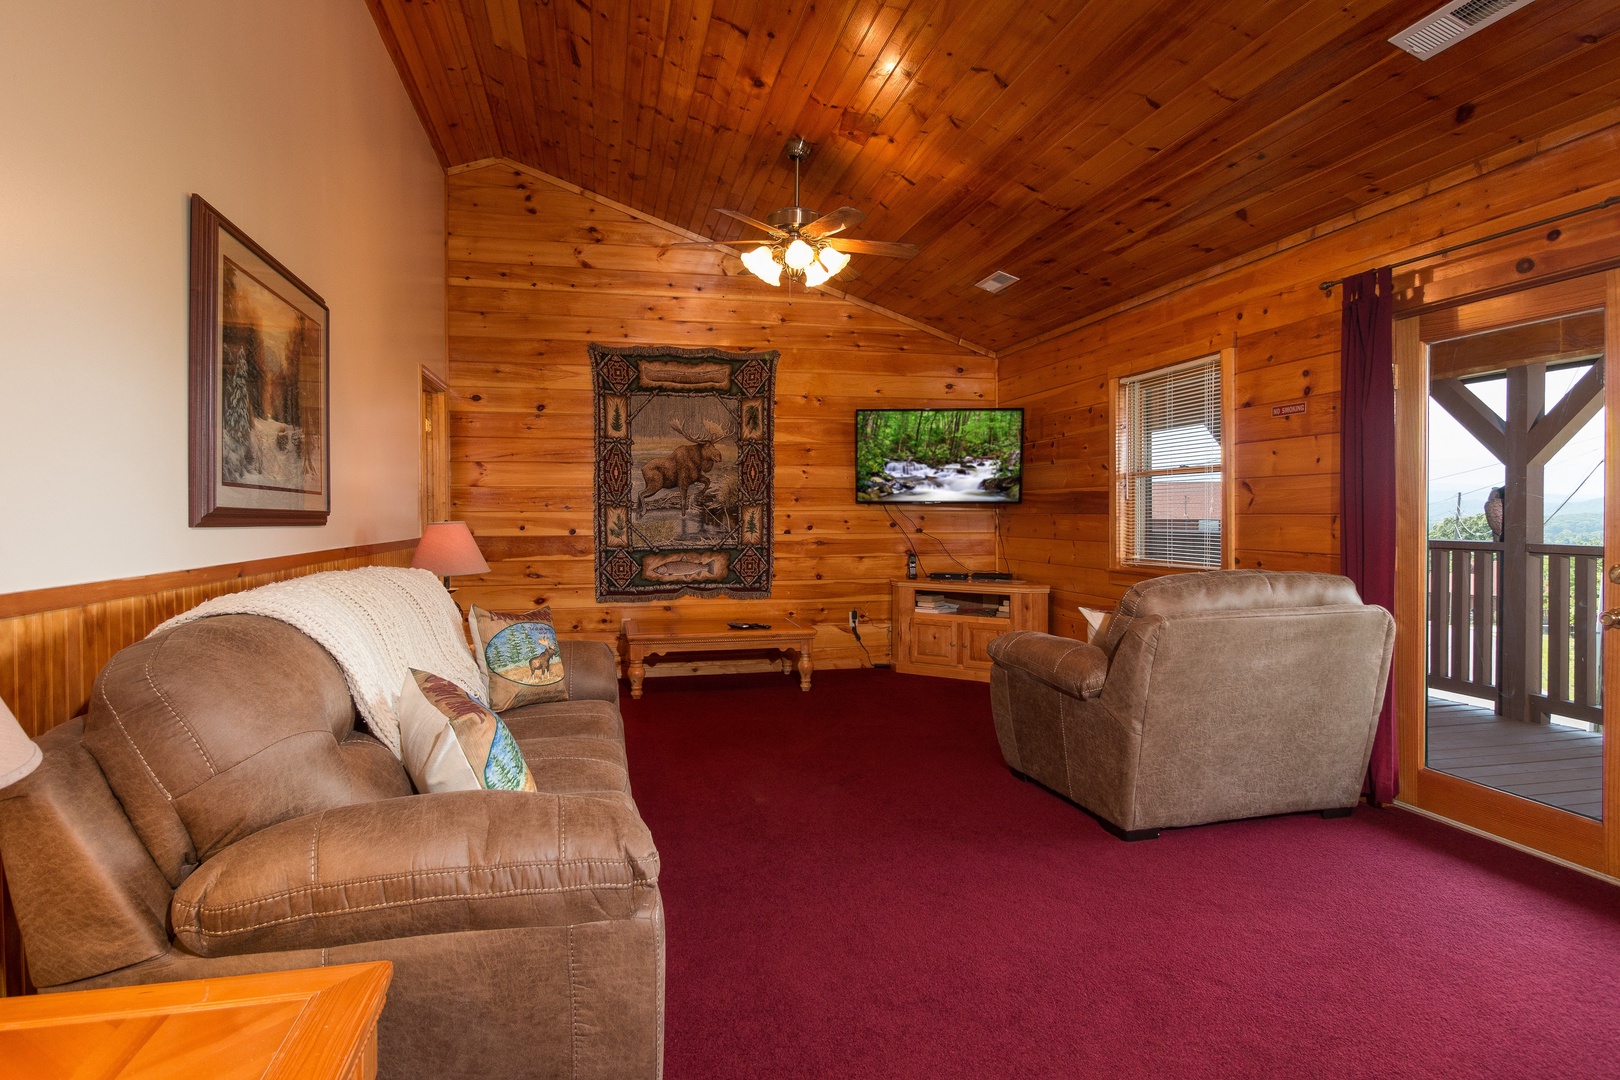 Living room with a TV and deck access at Moose Lodge, a 4 bedroom cabin rental located in Sevierville